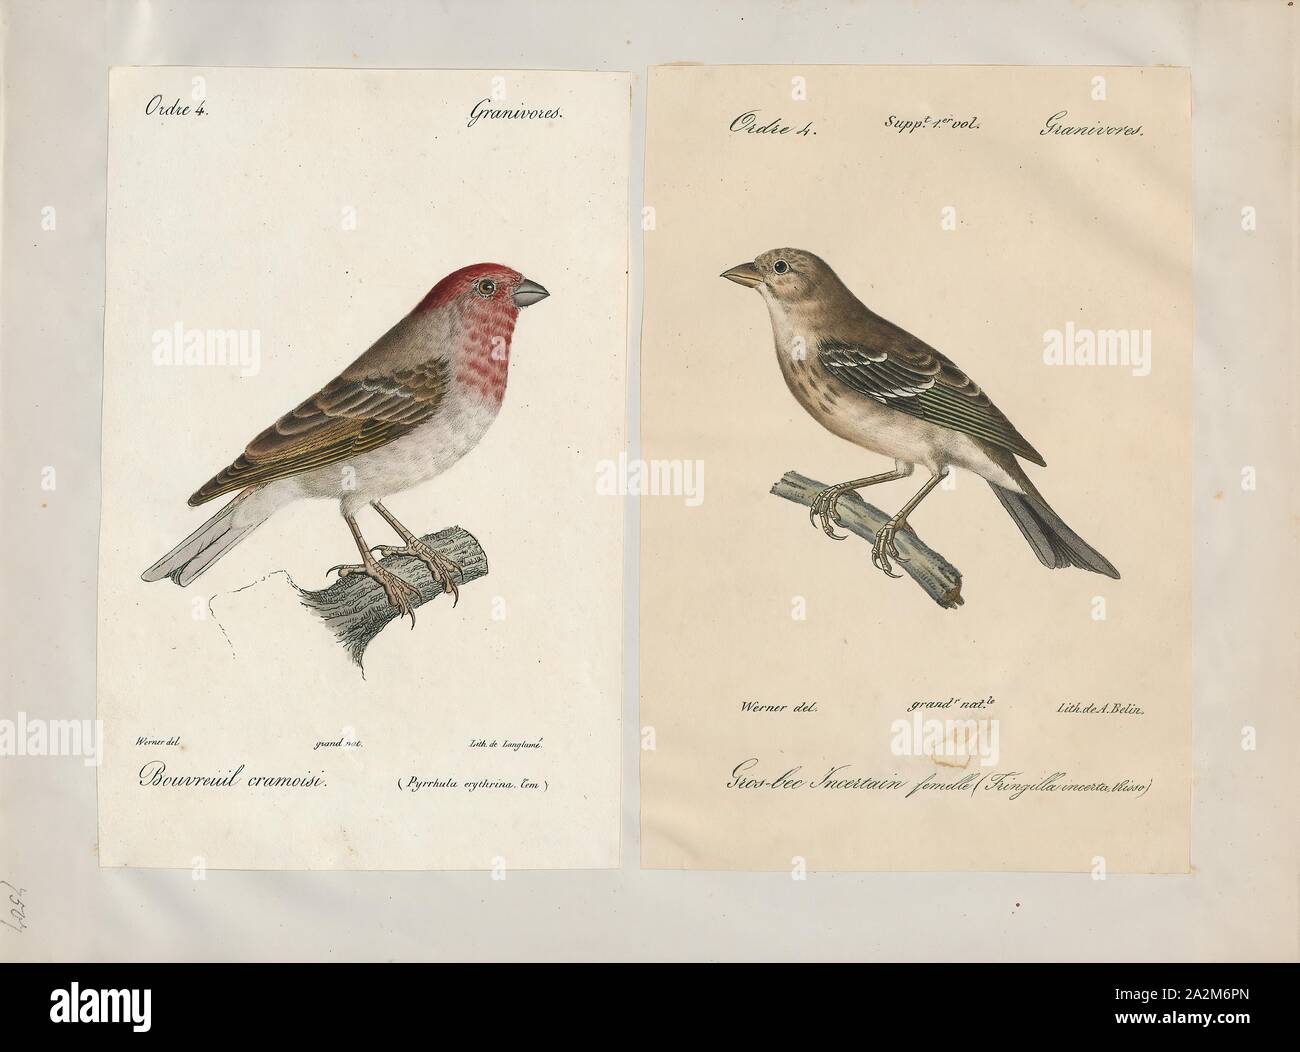 Carpodacus erythrinus, Print, The common rosefinch (Carpodacus erythrinus) or scarlet rosefinch is the most widespread and common rosefinch of Asia and Europe., 1700-1880 Stock Photo